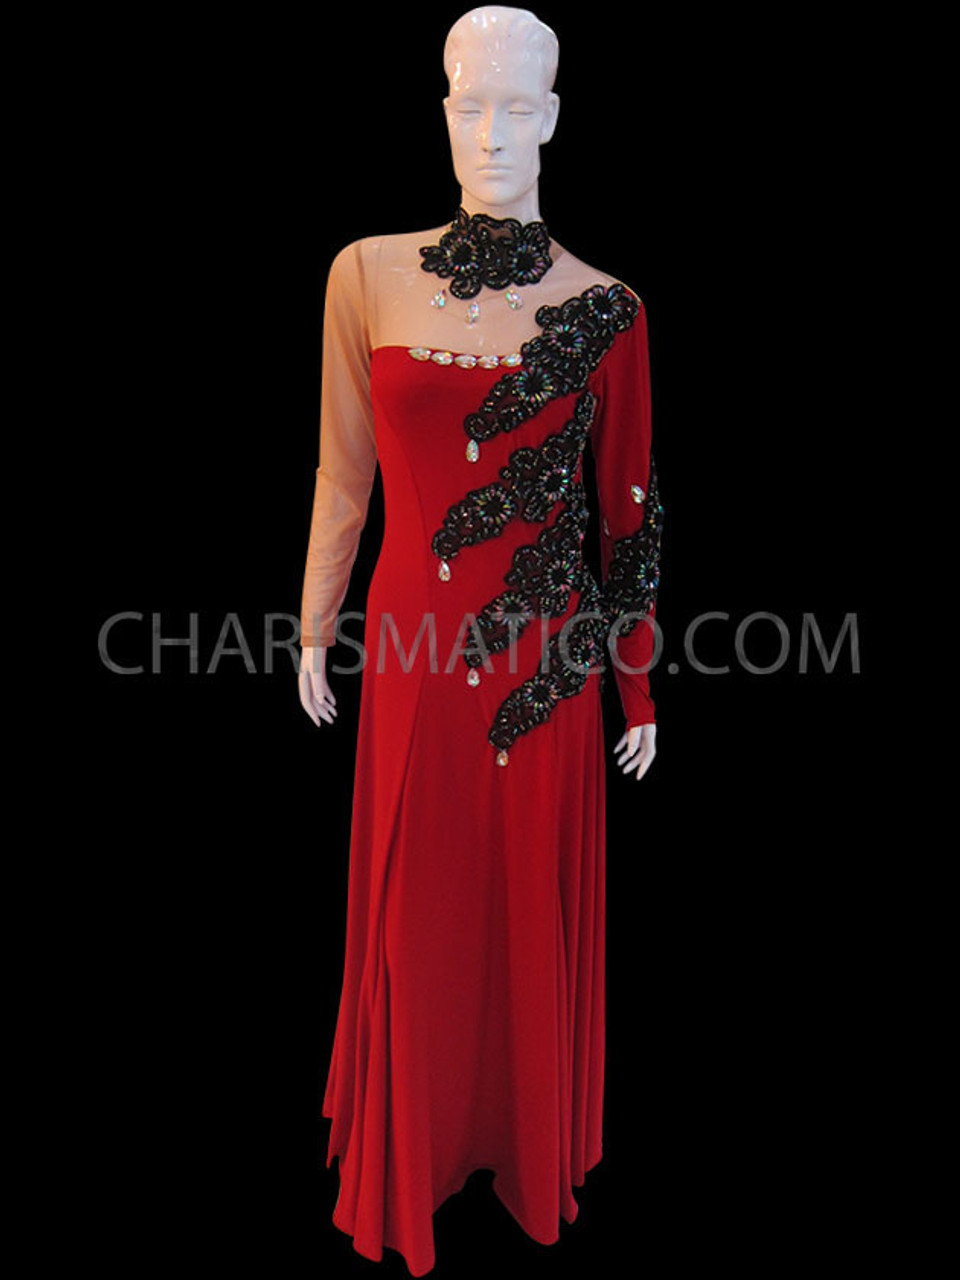 Sheer High Necked Red Ballroom Gown ...